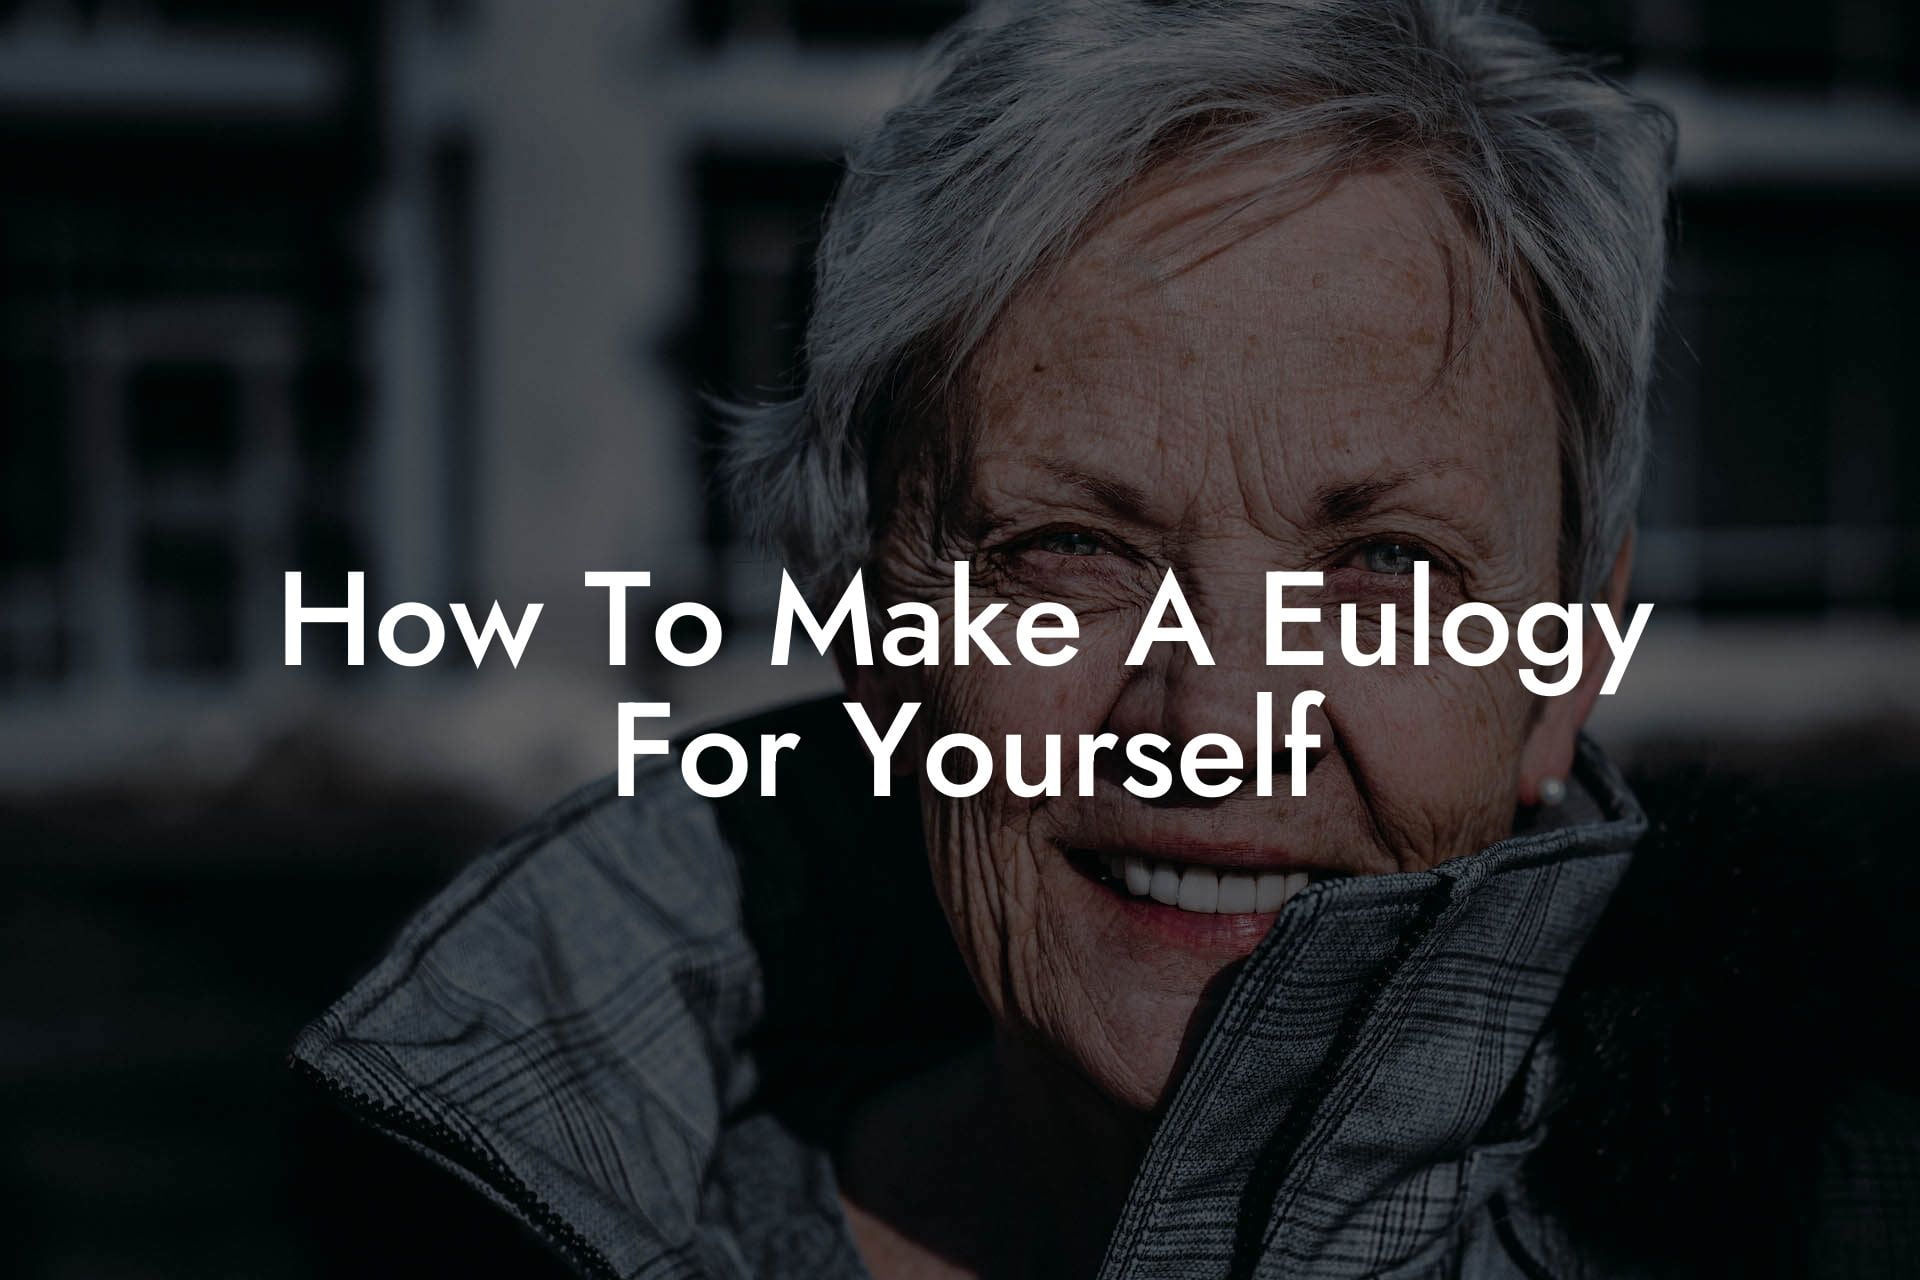 How To Make A Eulogy For Yourself